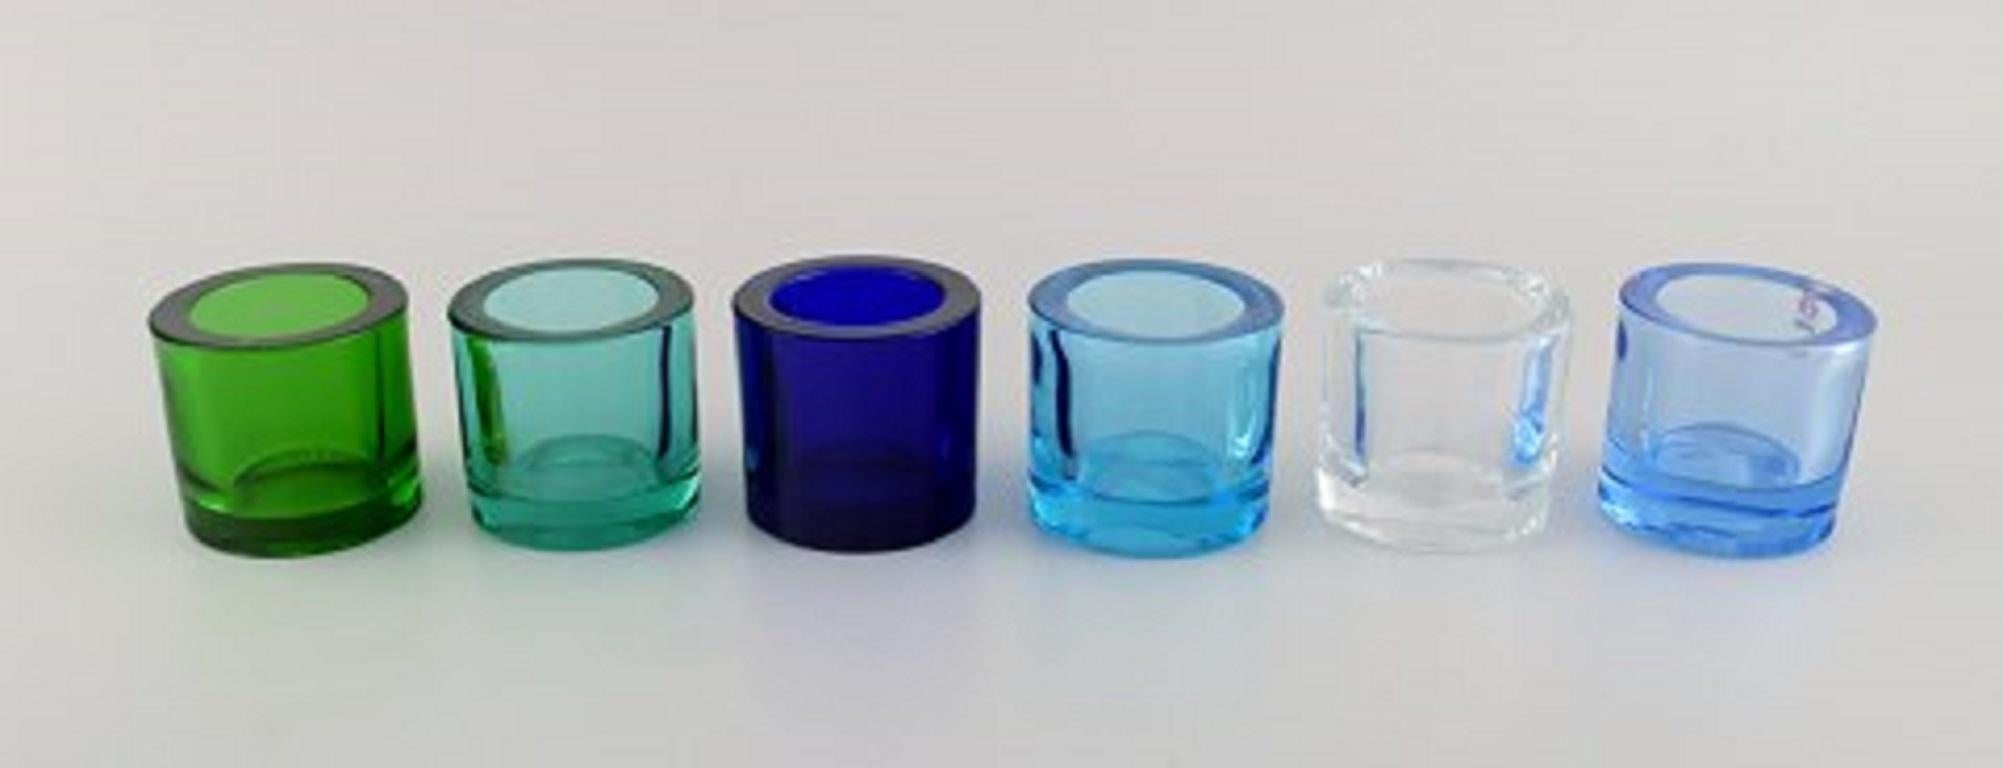 19 Iittala candle holders for tealights in art glass. Marimekko, 20th century.
Measures: 6.5 x 6 cm.
In excellent condition.
Stamped.